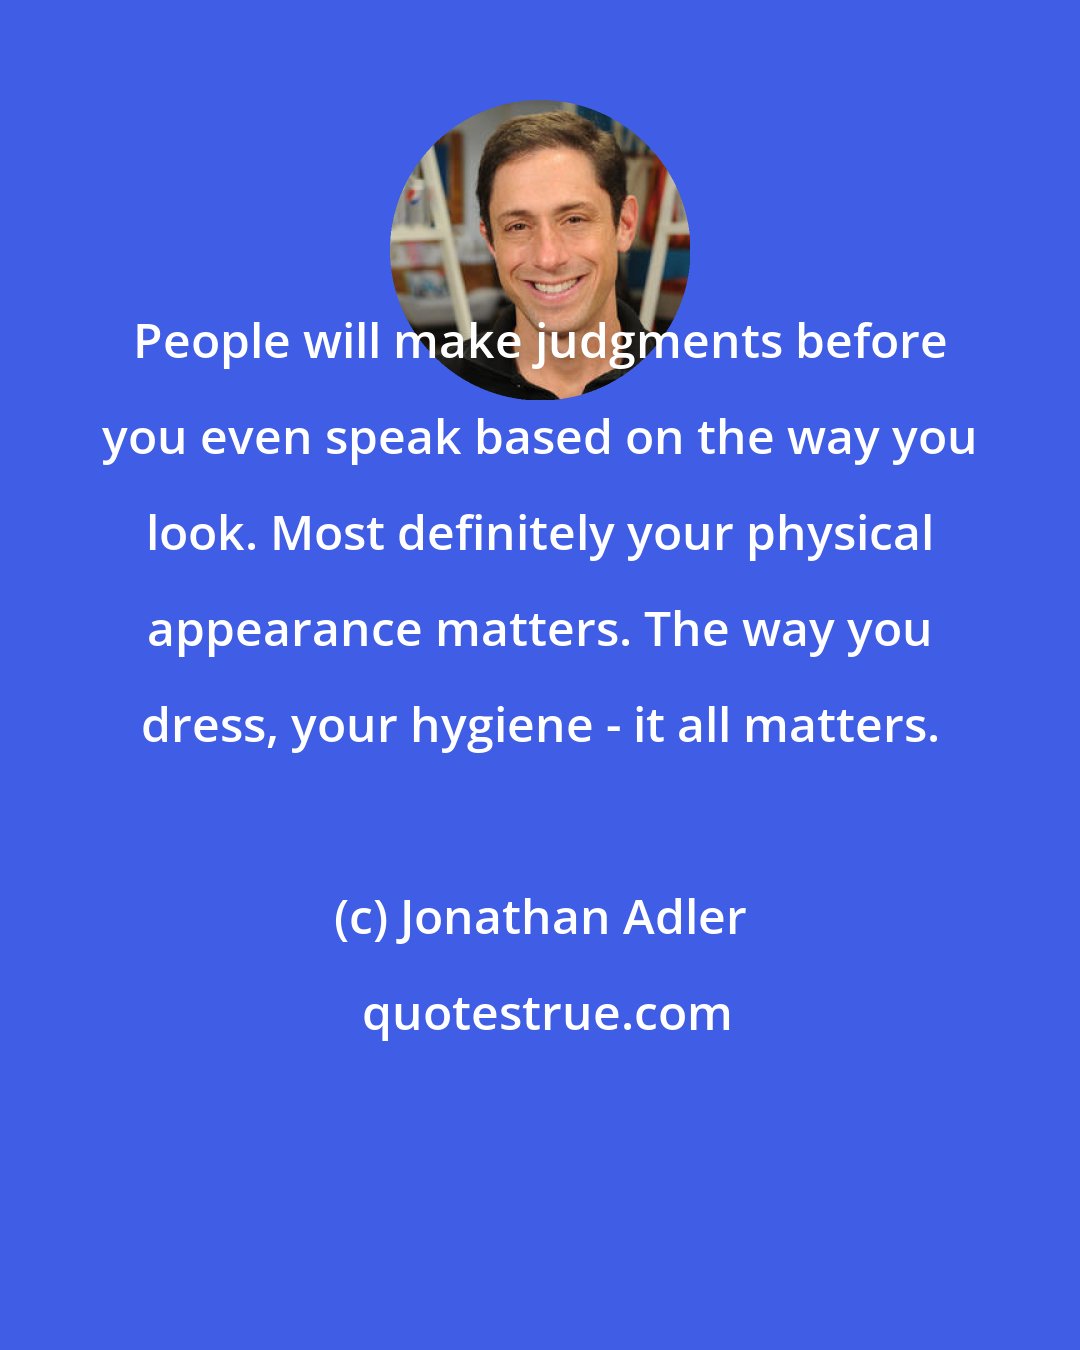 Jonathan Adler: People will make judgments before you even speak based on the way you look. Most definitely your physical appearance matters. The way you dress, your hygiene - it all matters.